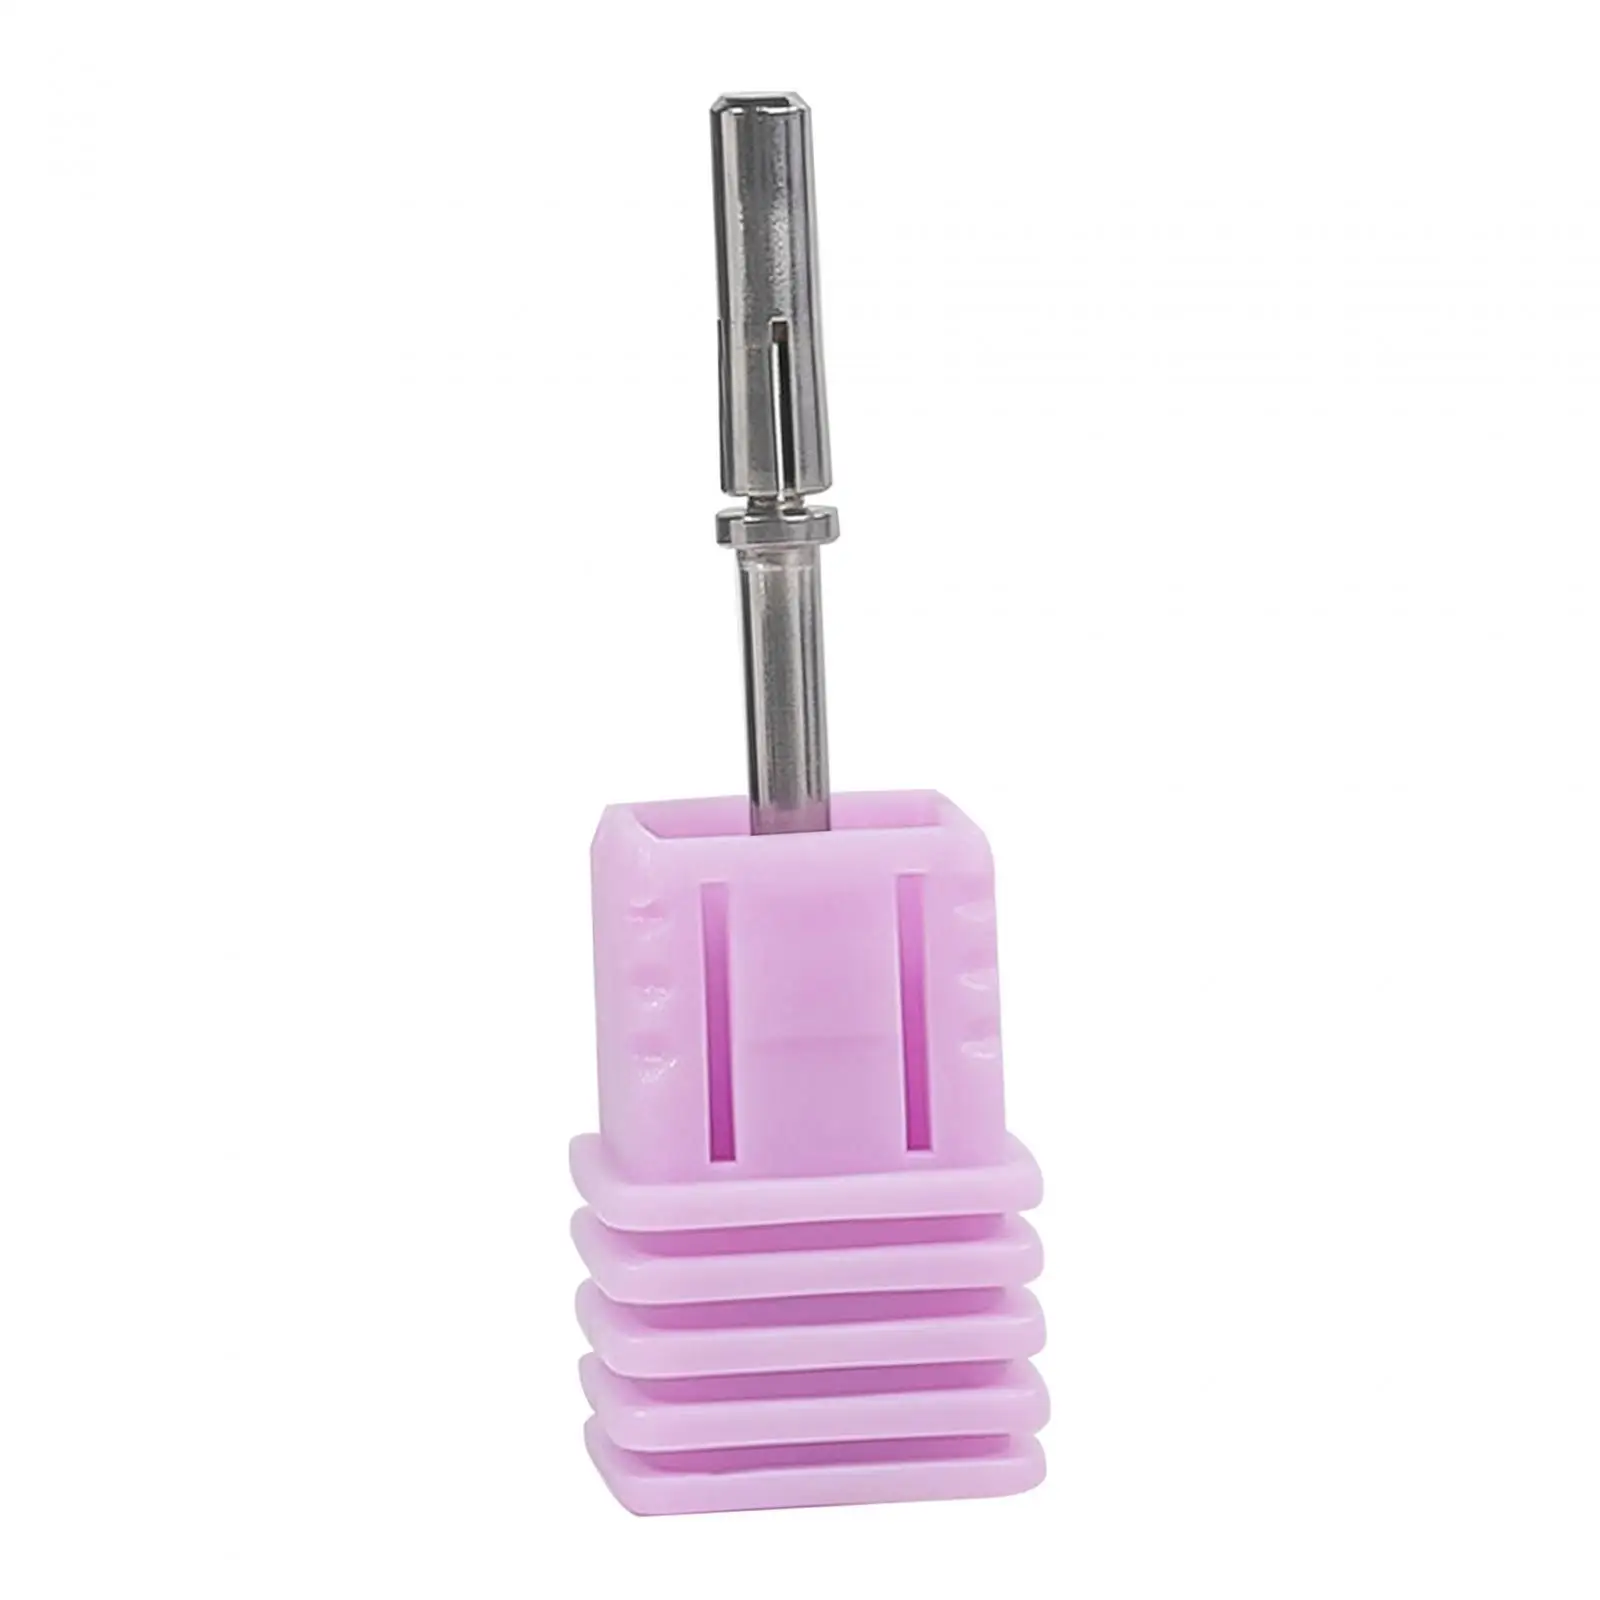 3.1mm Nail Mandrel Bit Professional Drill Accessories Holder Drill Shaft for Nail Sanders Home Home Pedicures